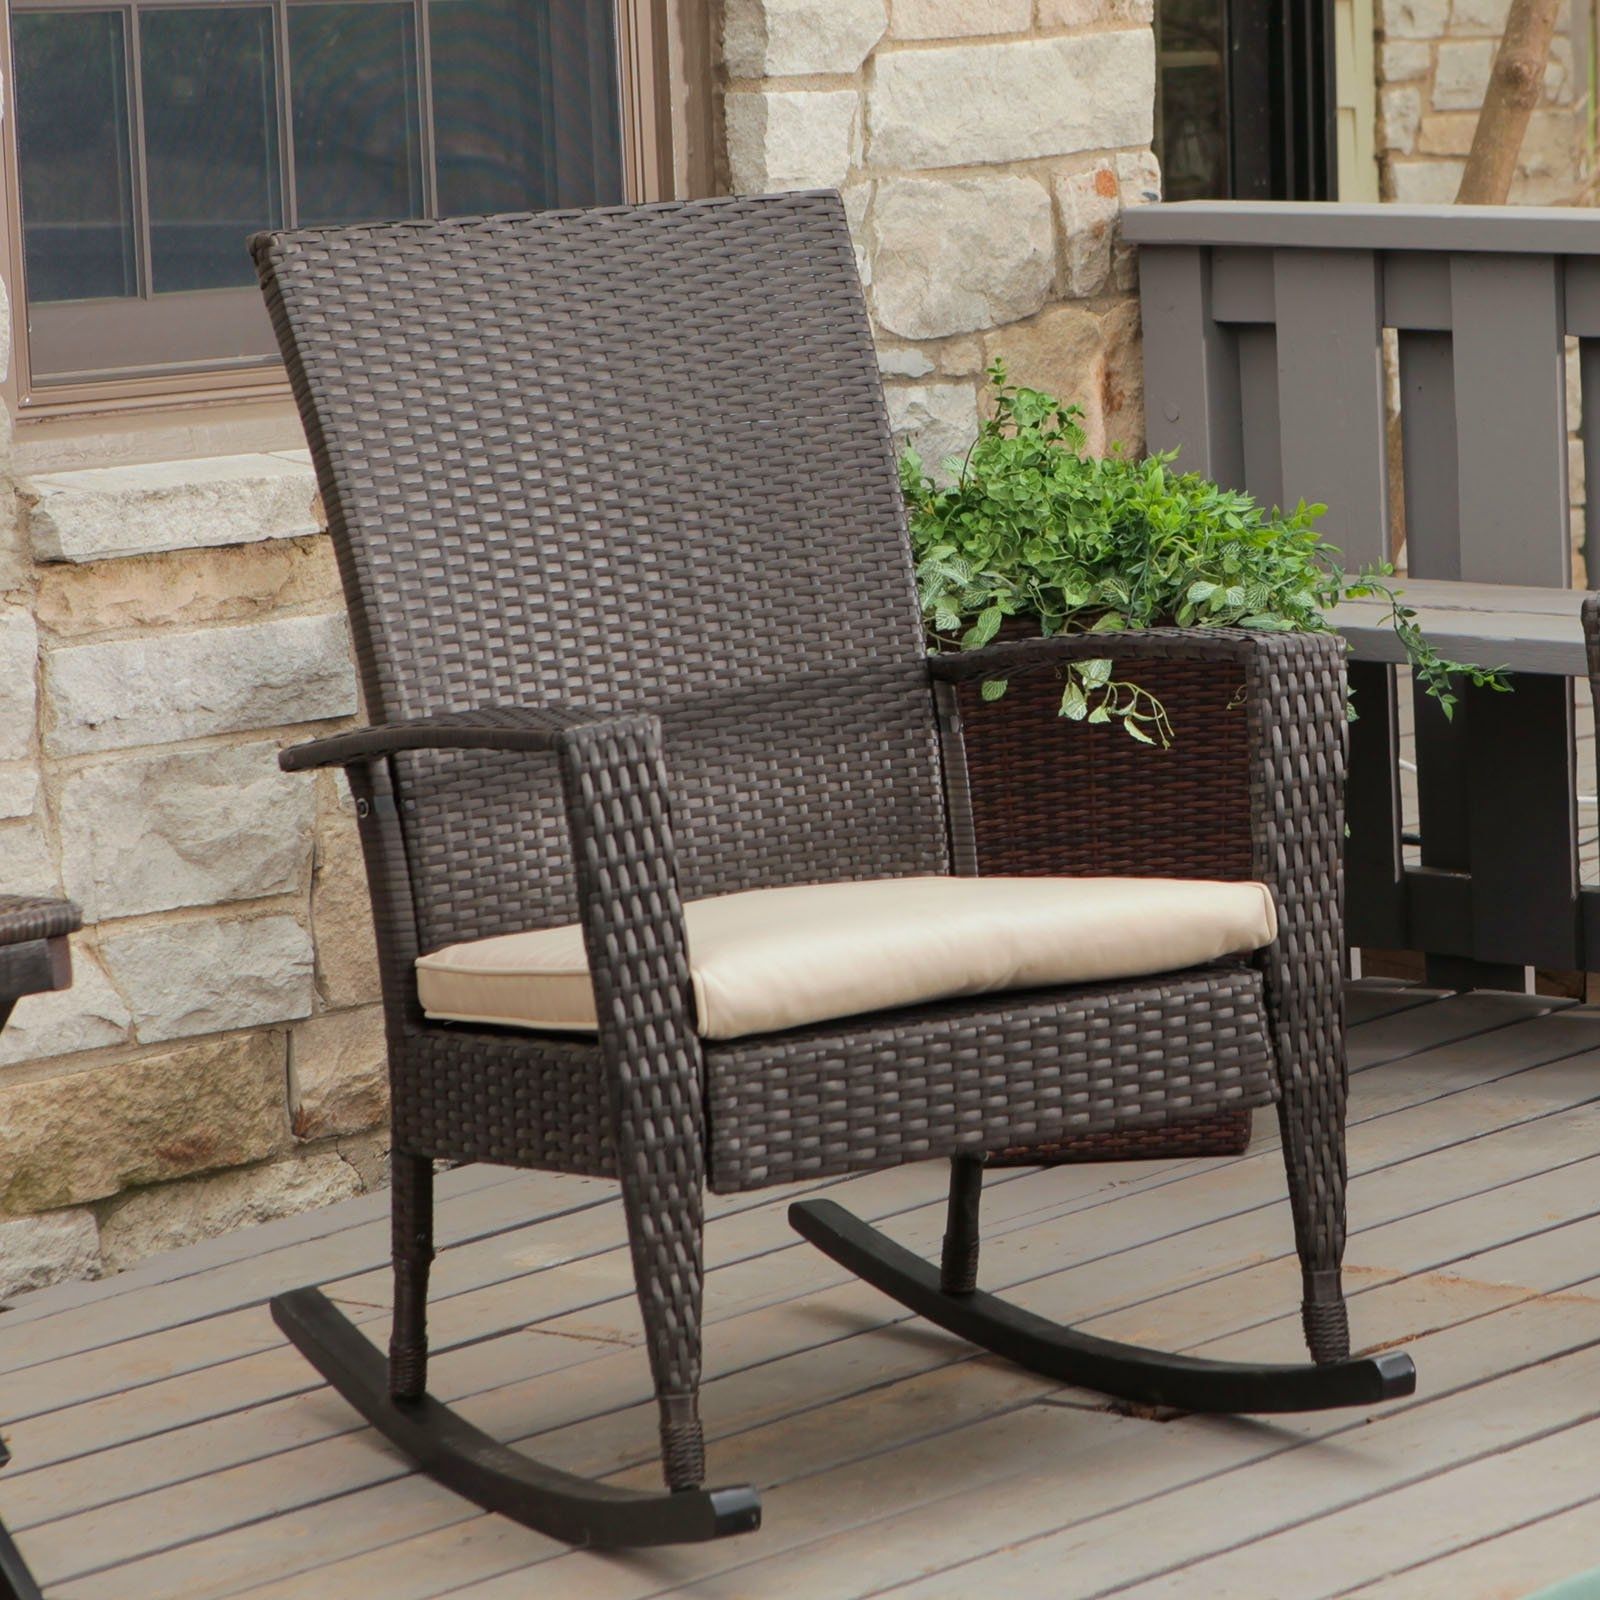 Outdoor: Wicker Rocking Chair In Brown With Stone Wall For Modern Regarding All Weather Patio Rocking Chairs (View 9 of 15)